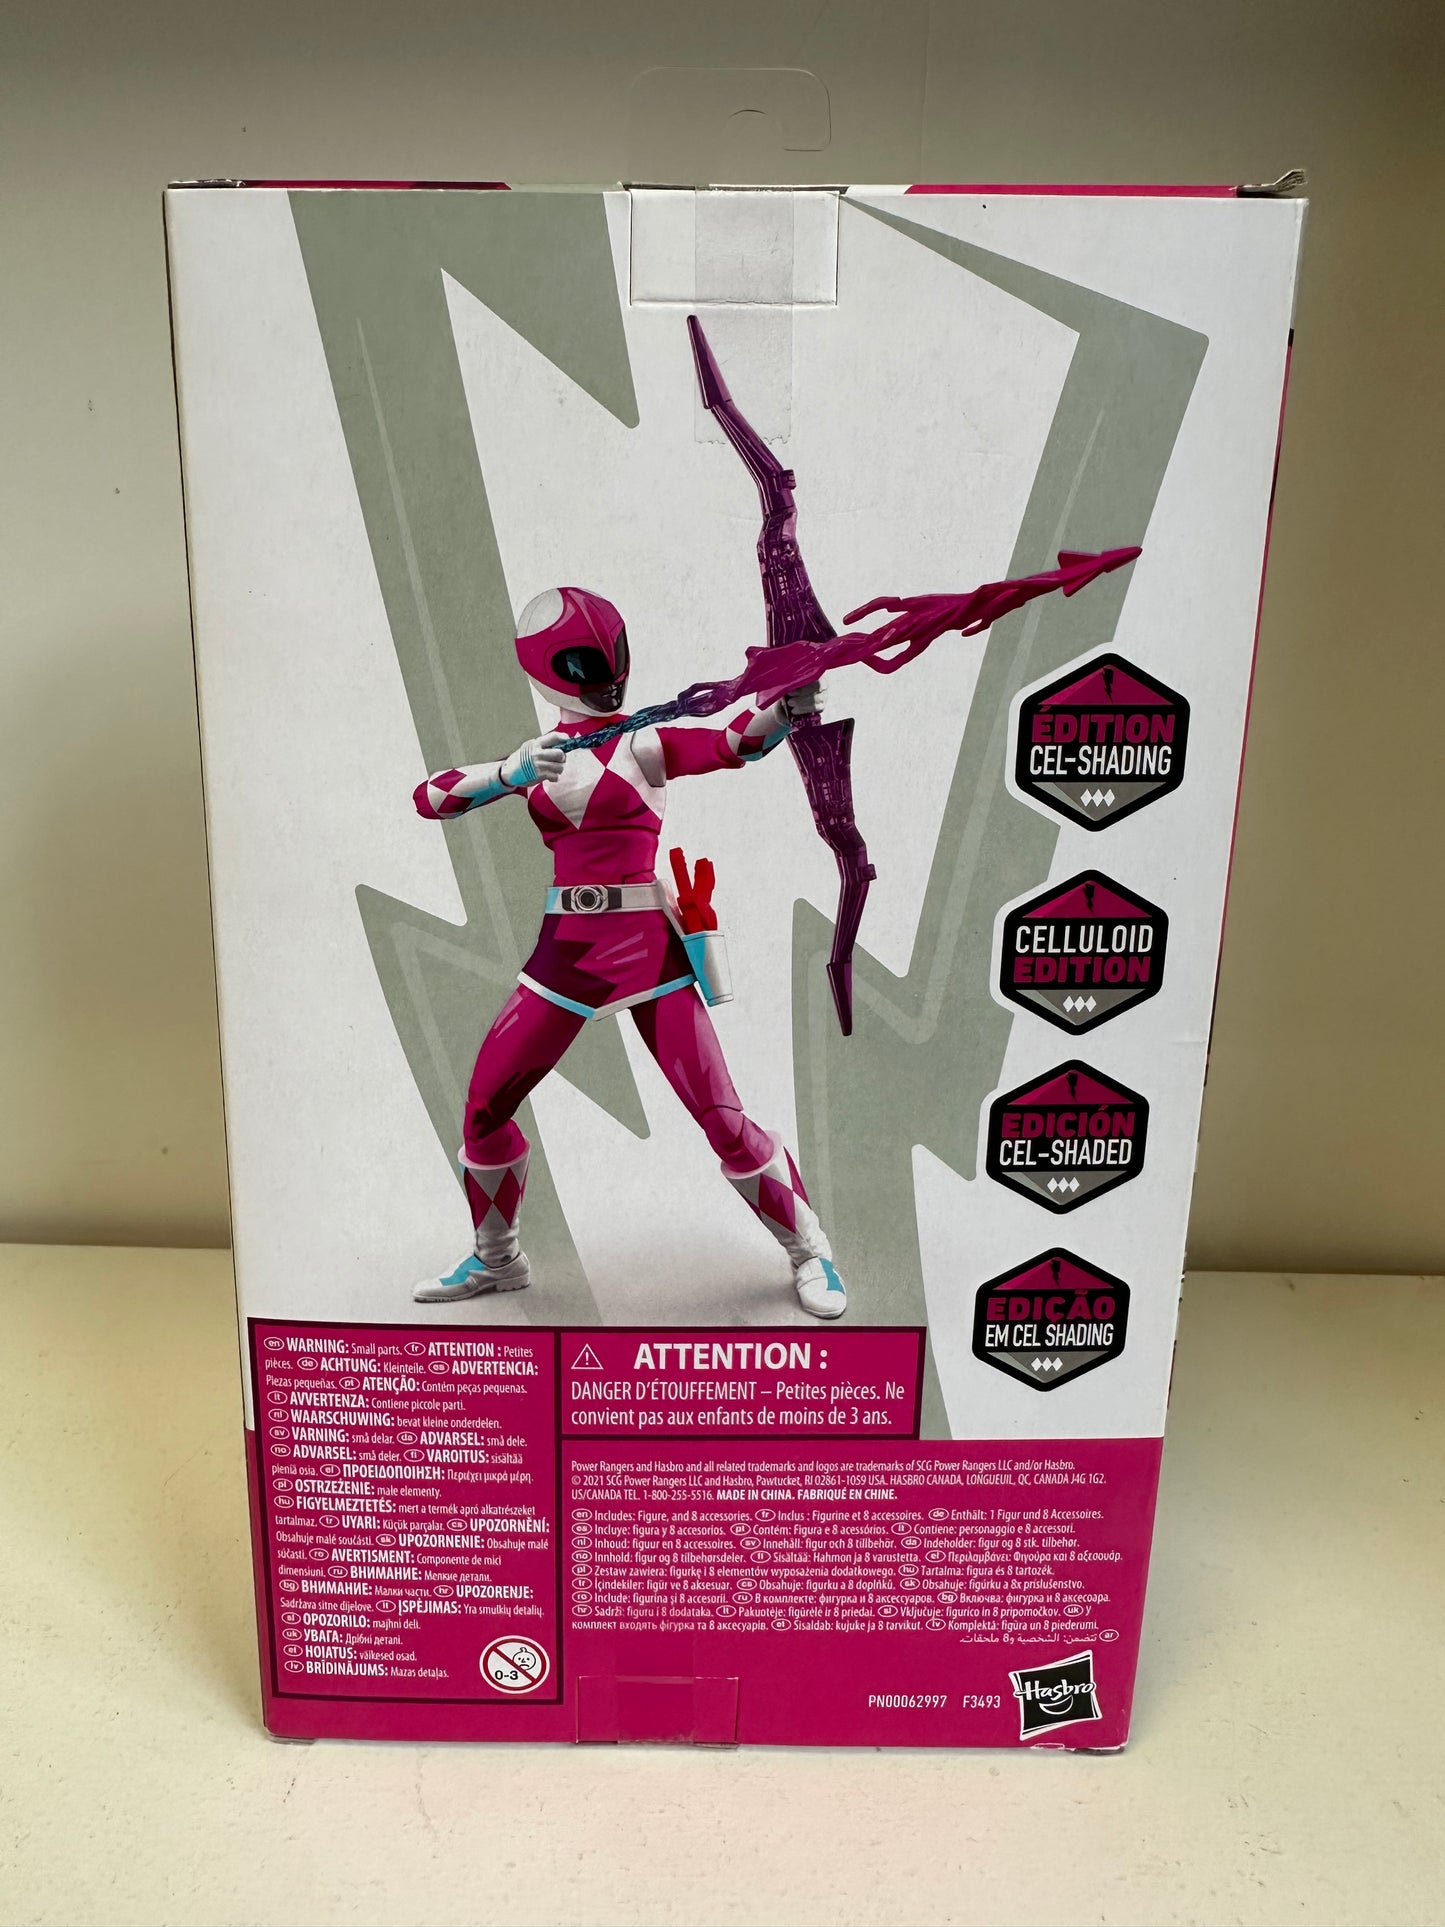 Mighty Morphin Power Rangers Pink Ranger MMPR Lightning Collection Sealed Action Figure Toy